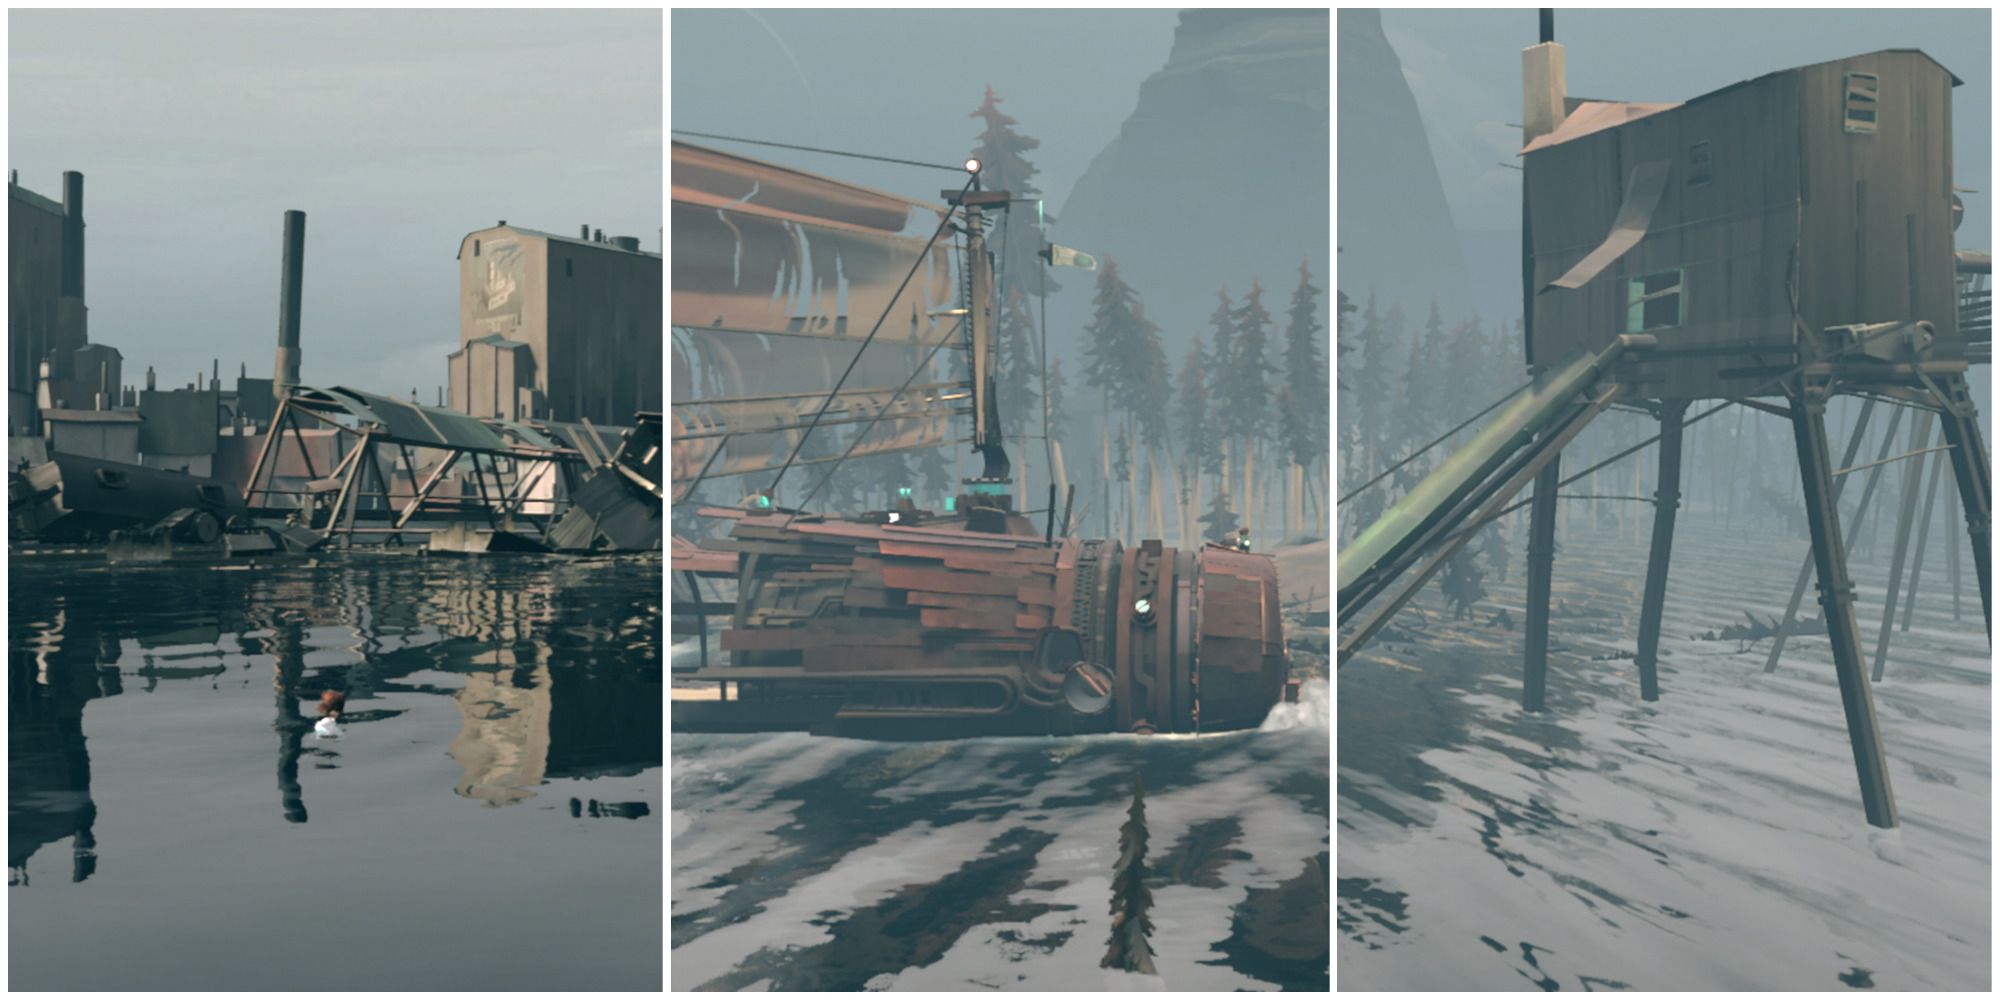 far changing tides character swimming in demolished city, ship on river, sawmill chute featured